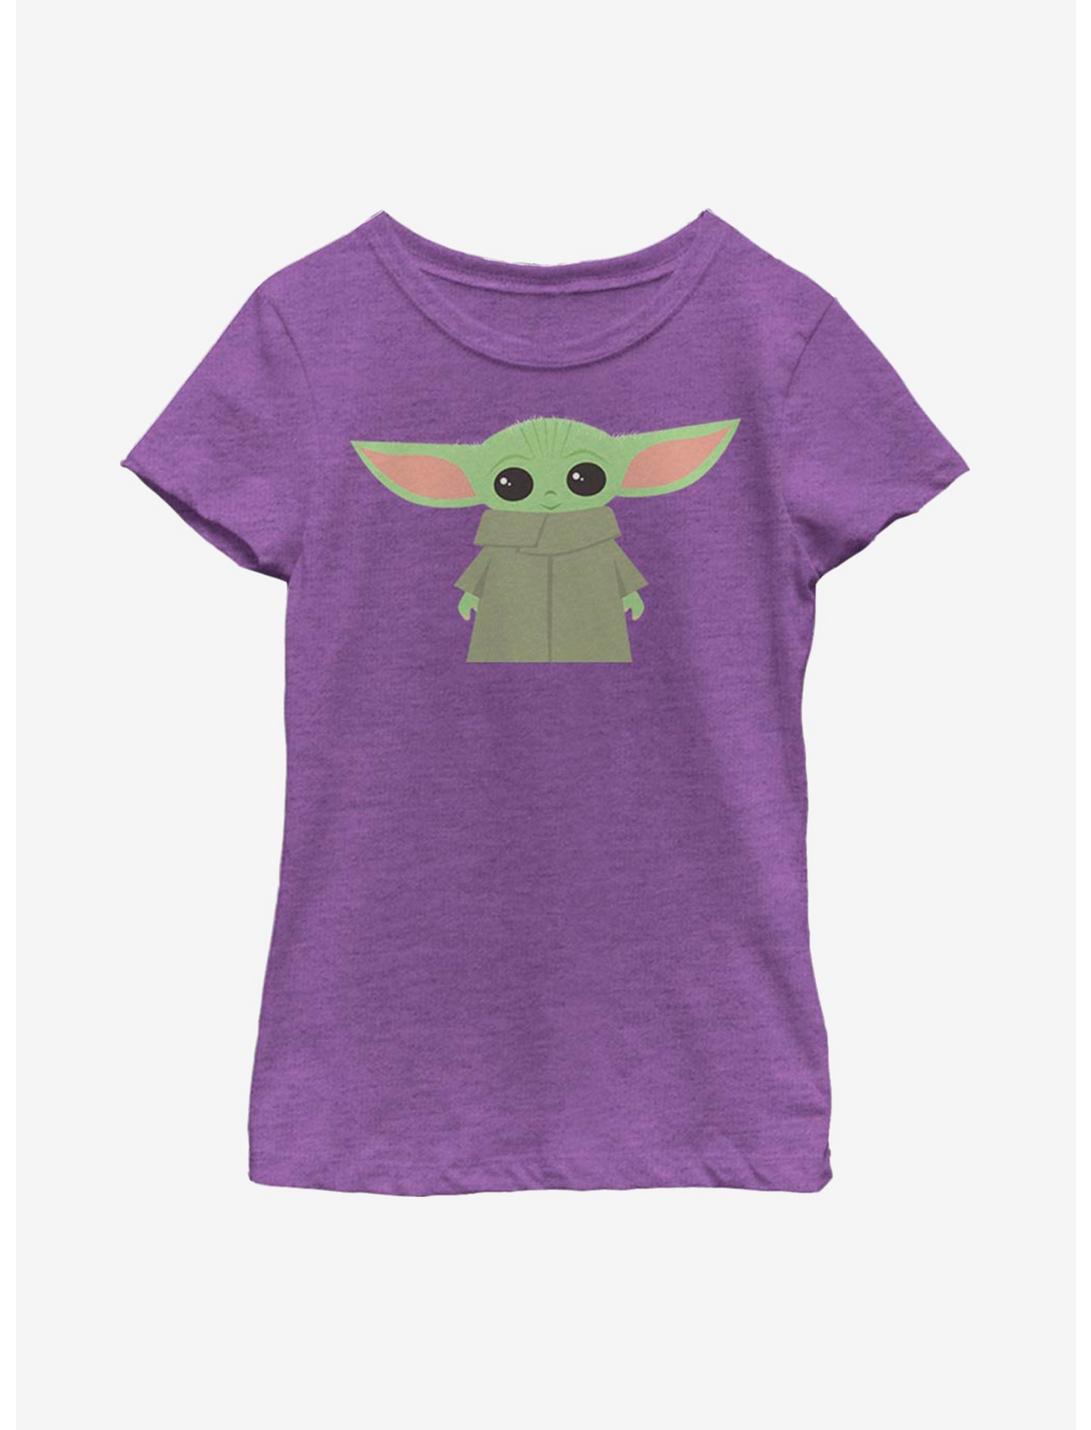 Plus Size Star Wars The Mandalorian The Child Simple And Cute Youth Girls T-Shirt, PURPLE BERRY, hi-res